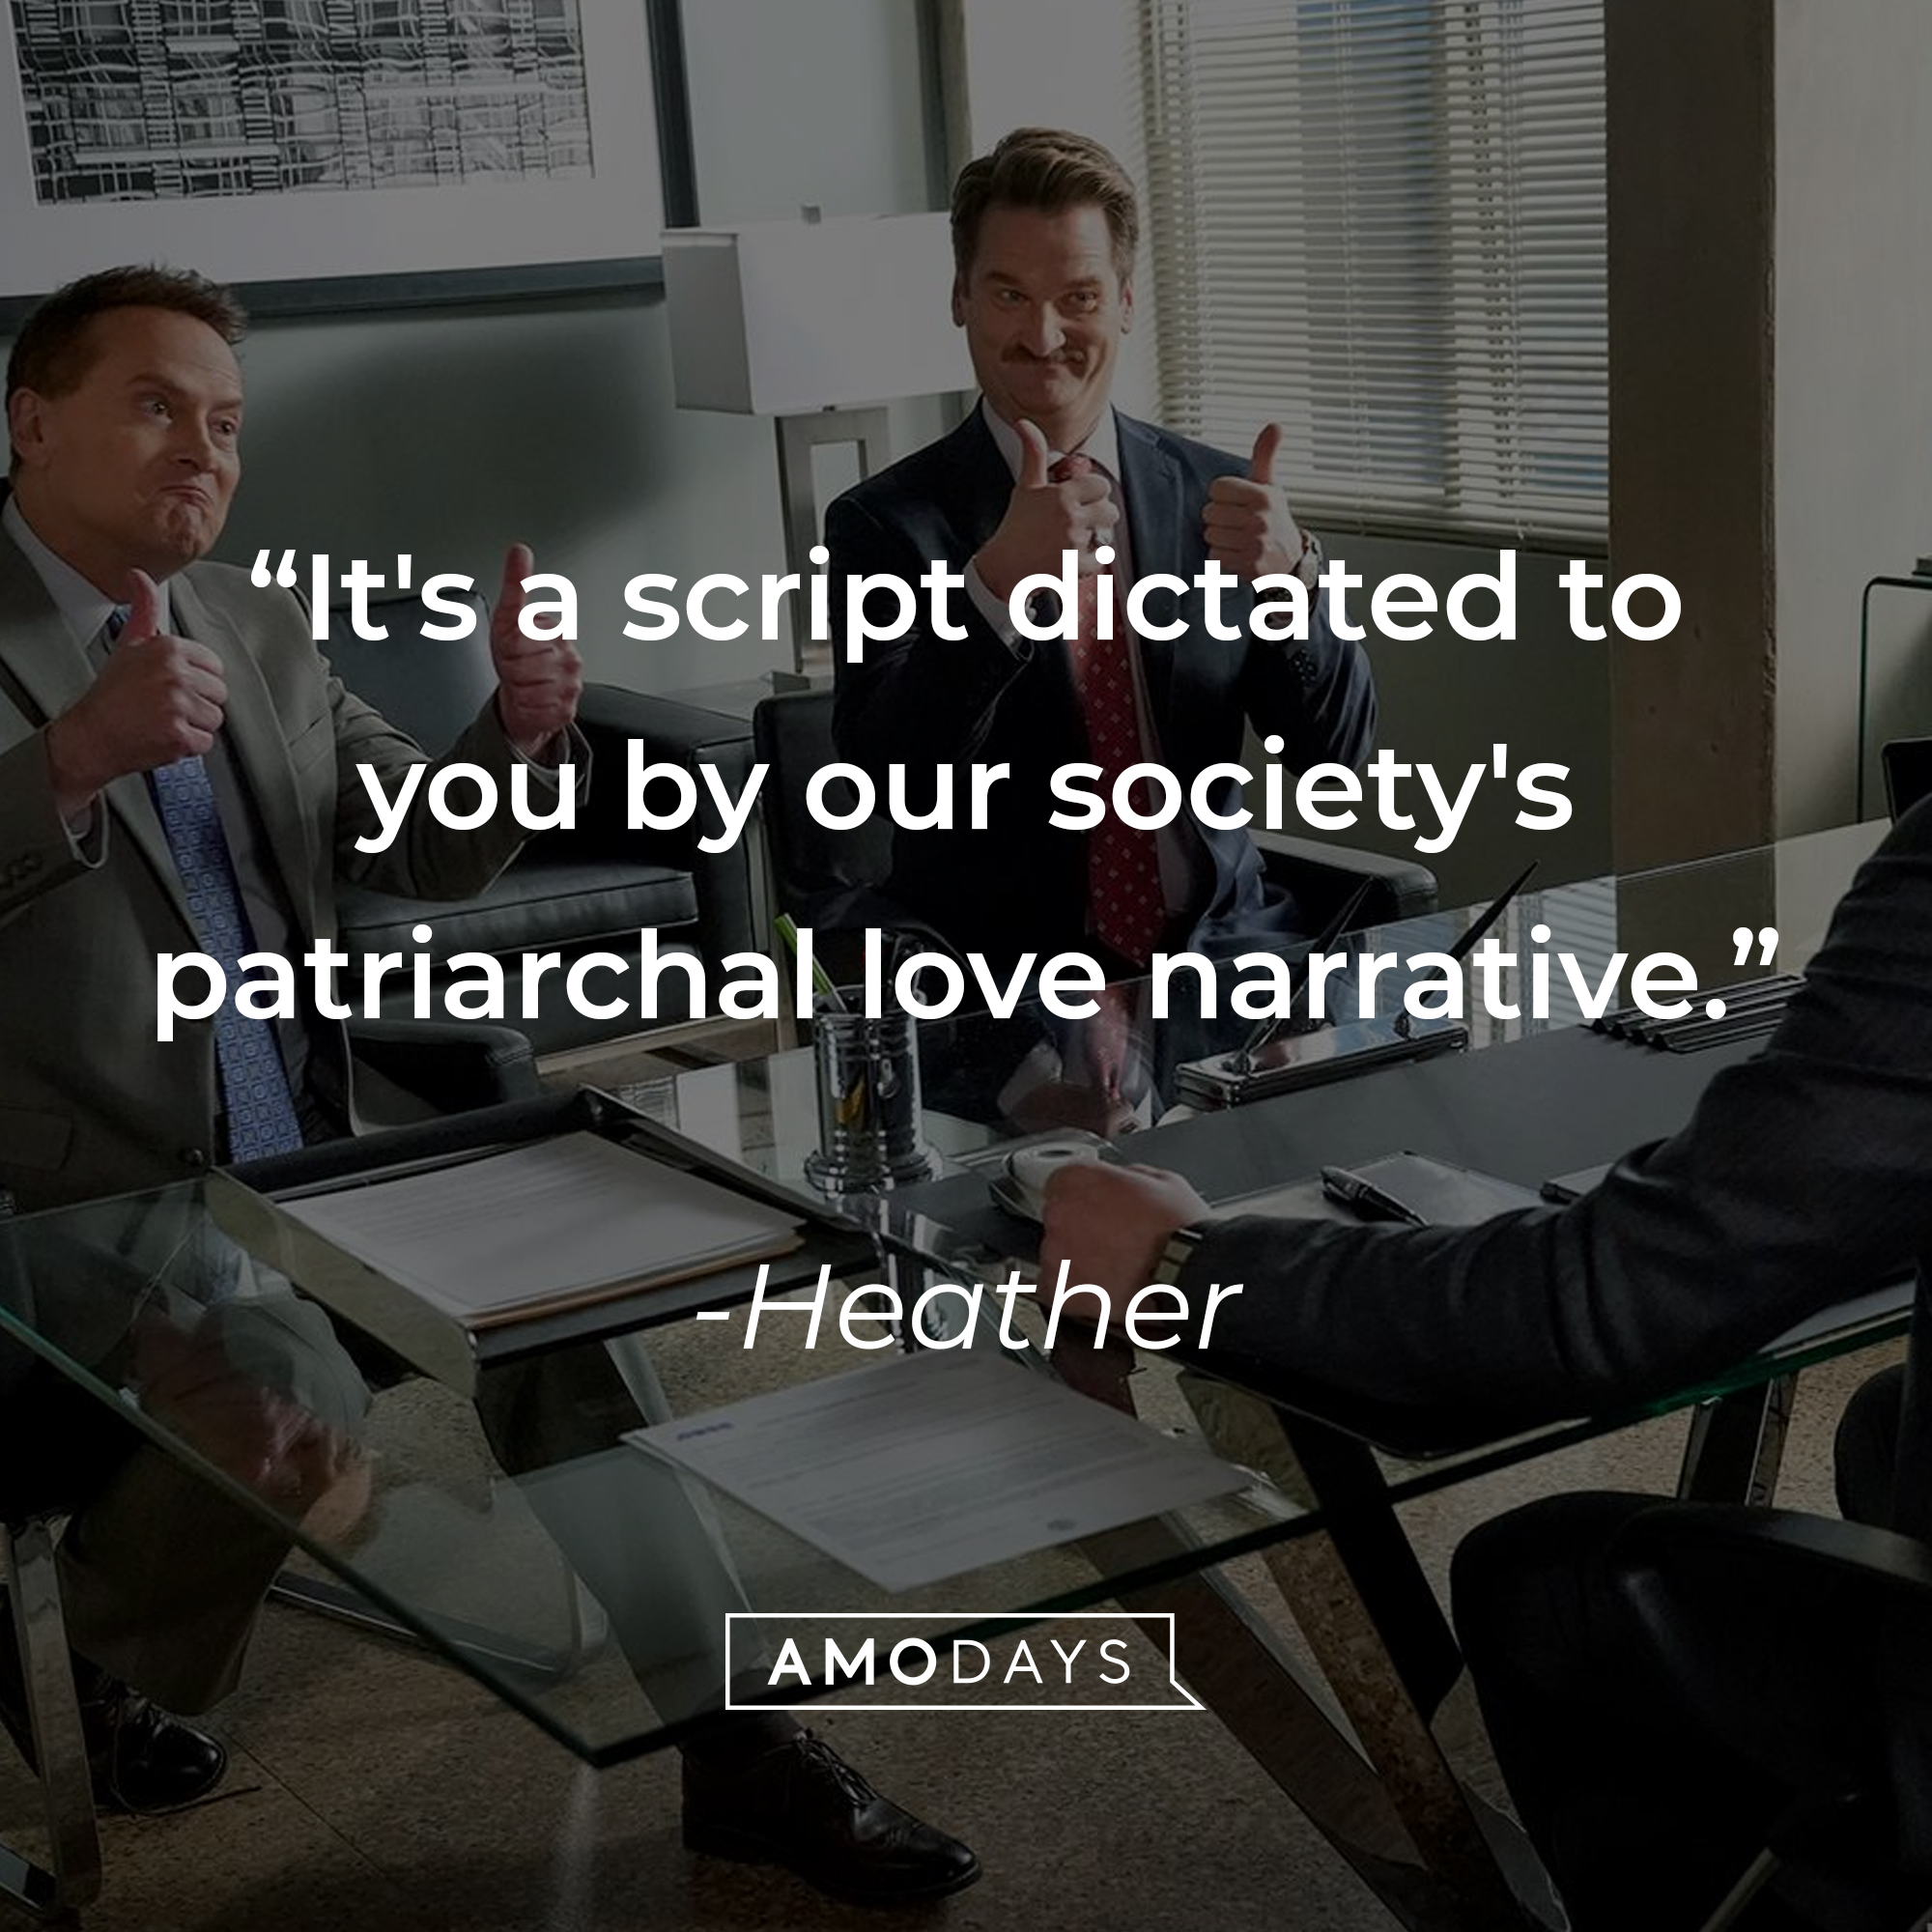 Darryl and other characters with Heather’s quote: “It's a script dictated to you by our society's patriarchal love narrative.” |Source: facebook.com/crazyxgf